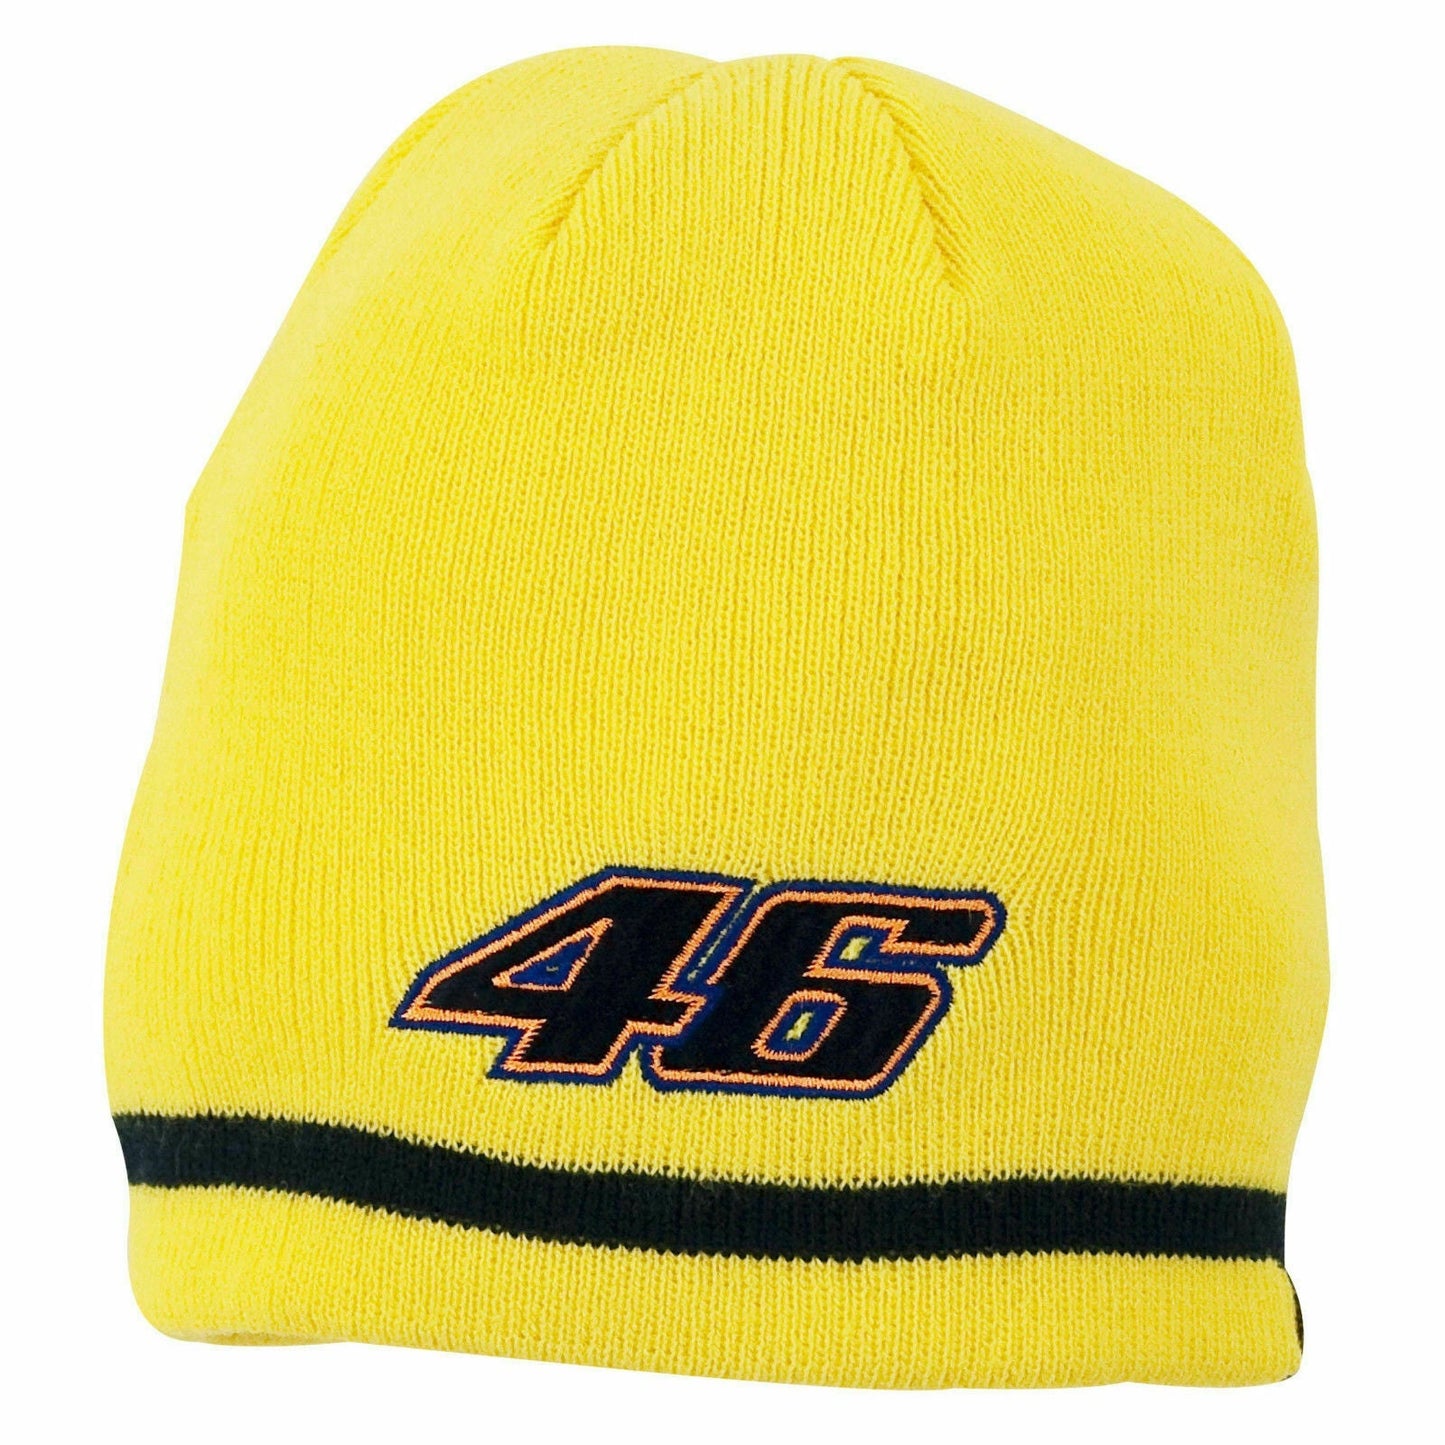 New Official Valentino Rossi VR46 Kids Yellow Beanie - Vrkbe 027 01